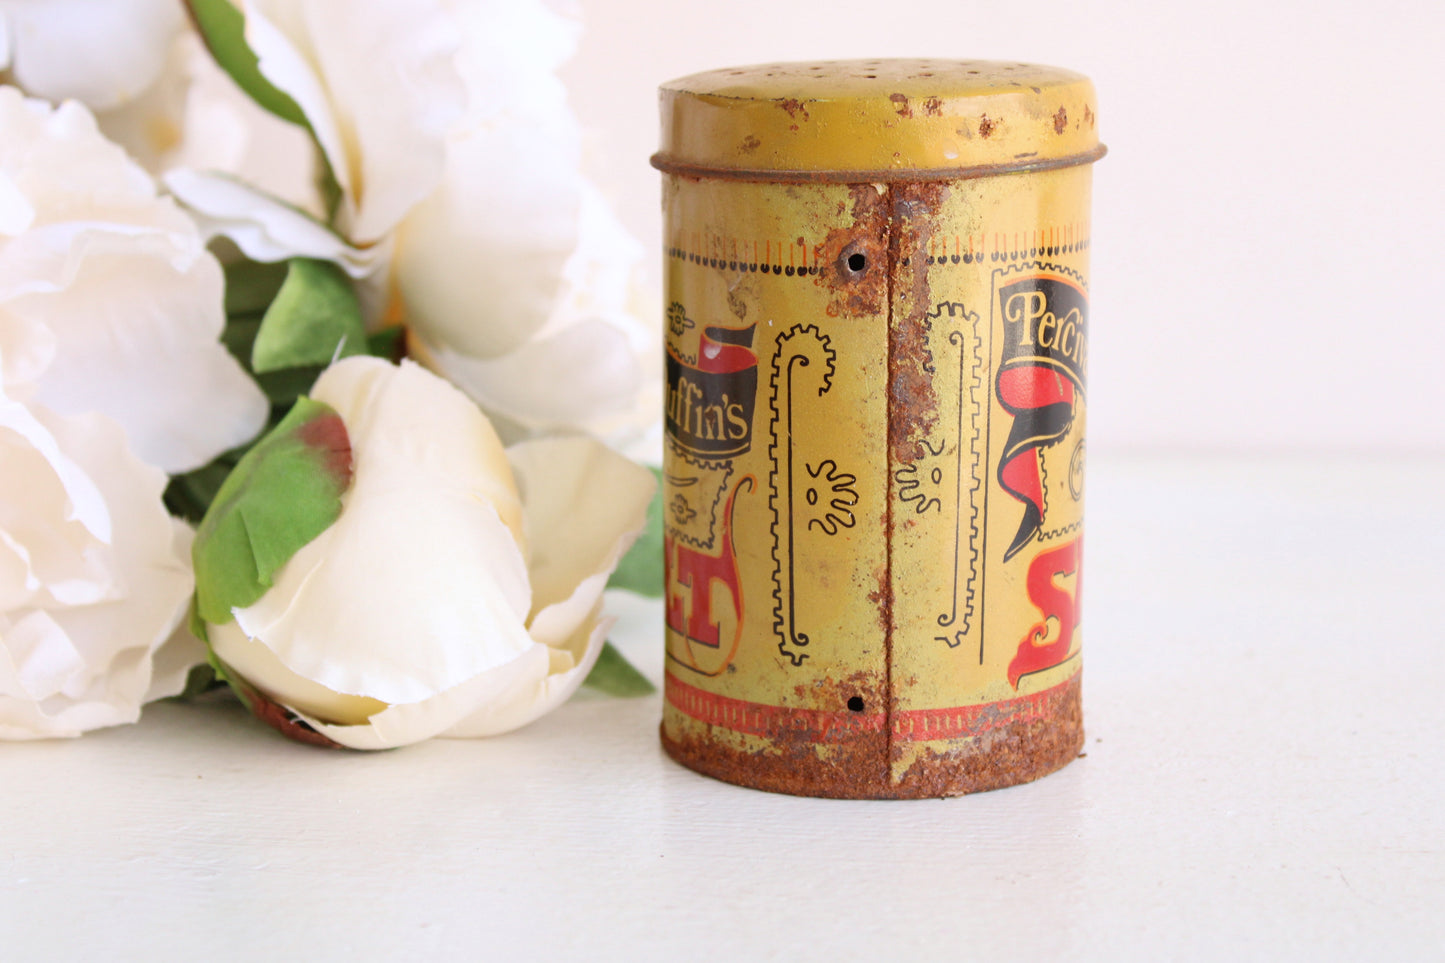 Vintage 1960s Collectible Tin Salt Shaker by Percival Duffins